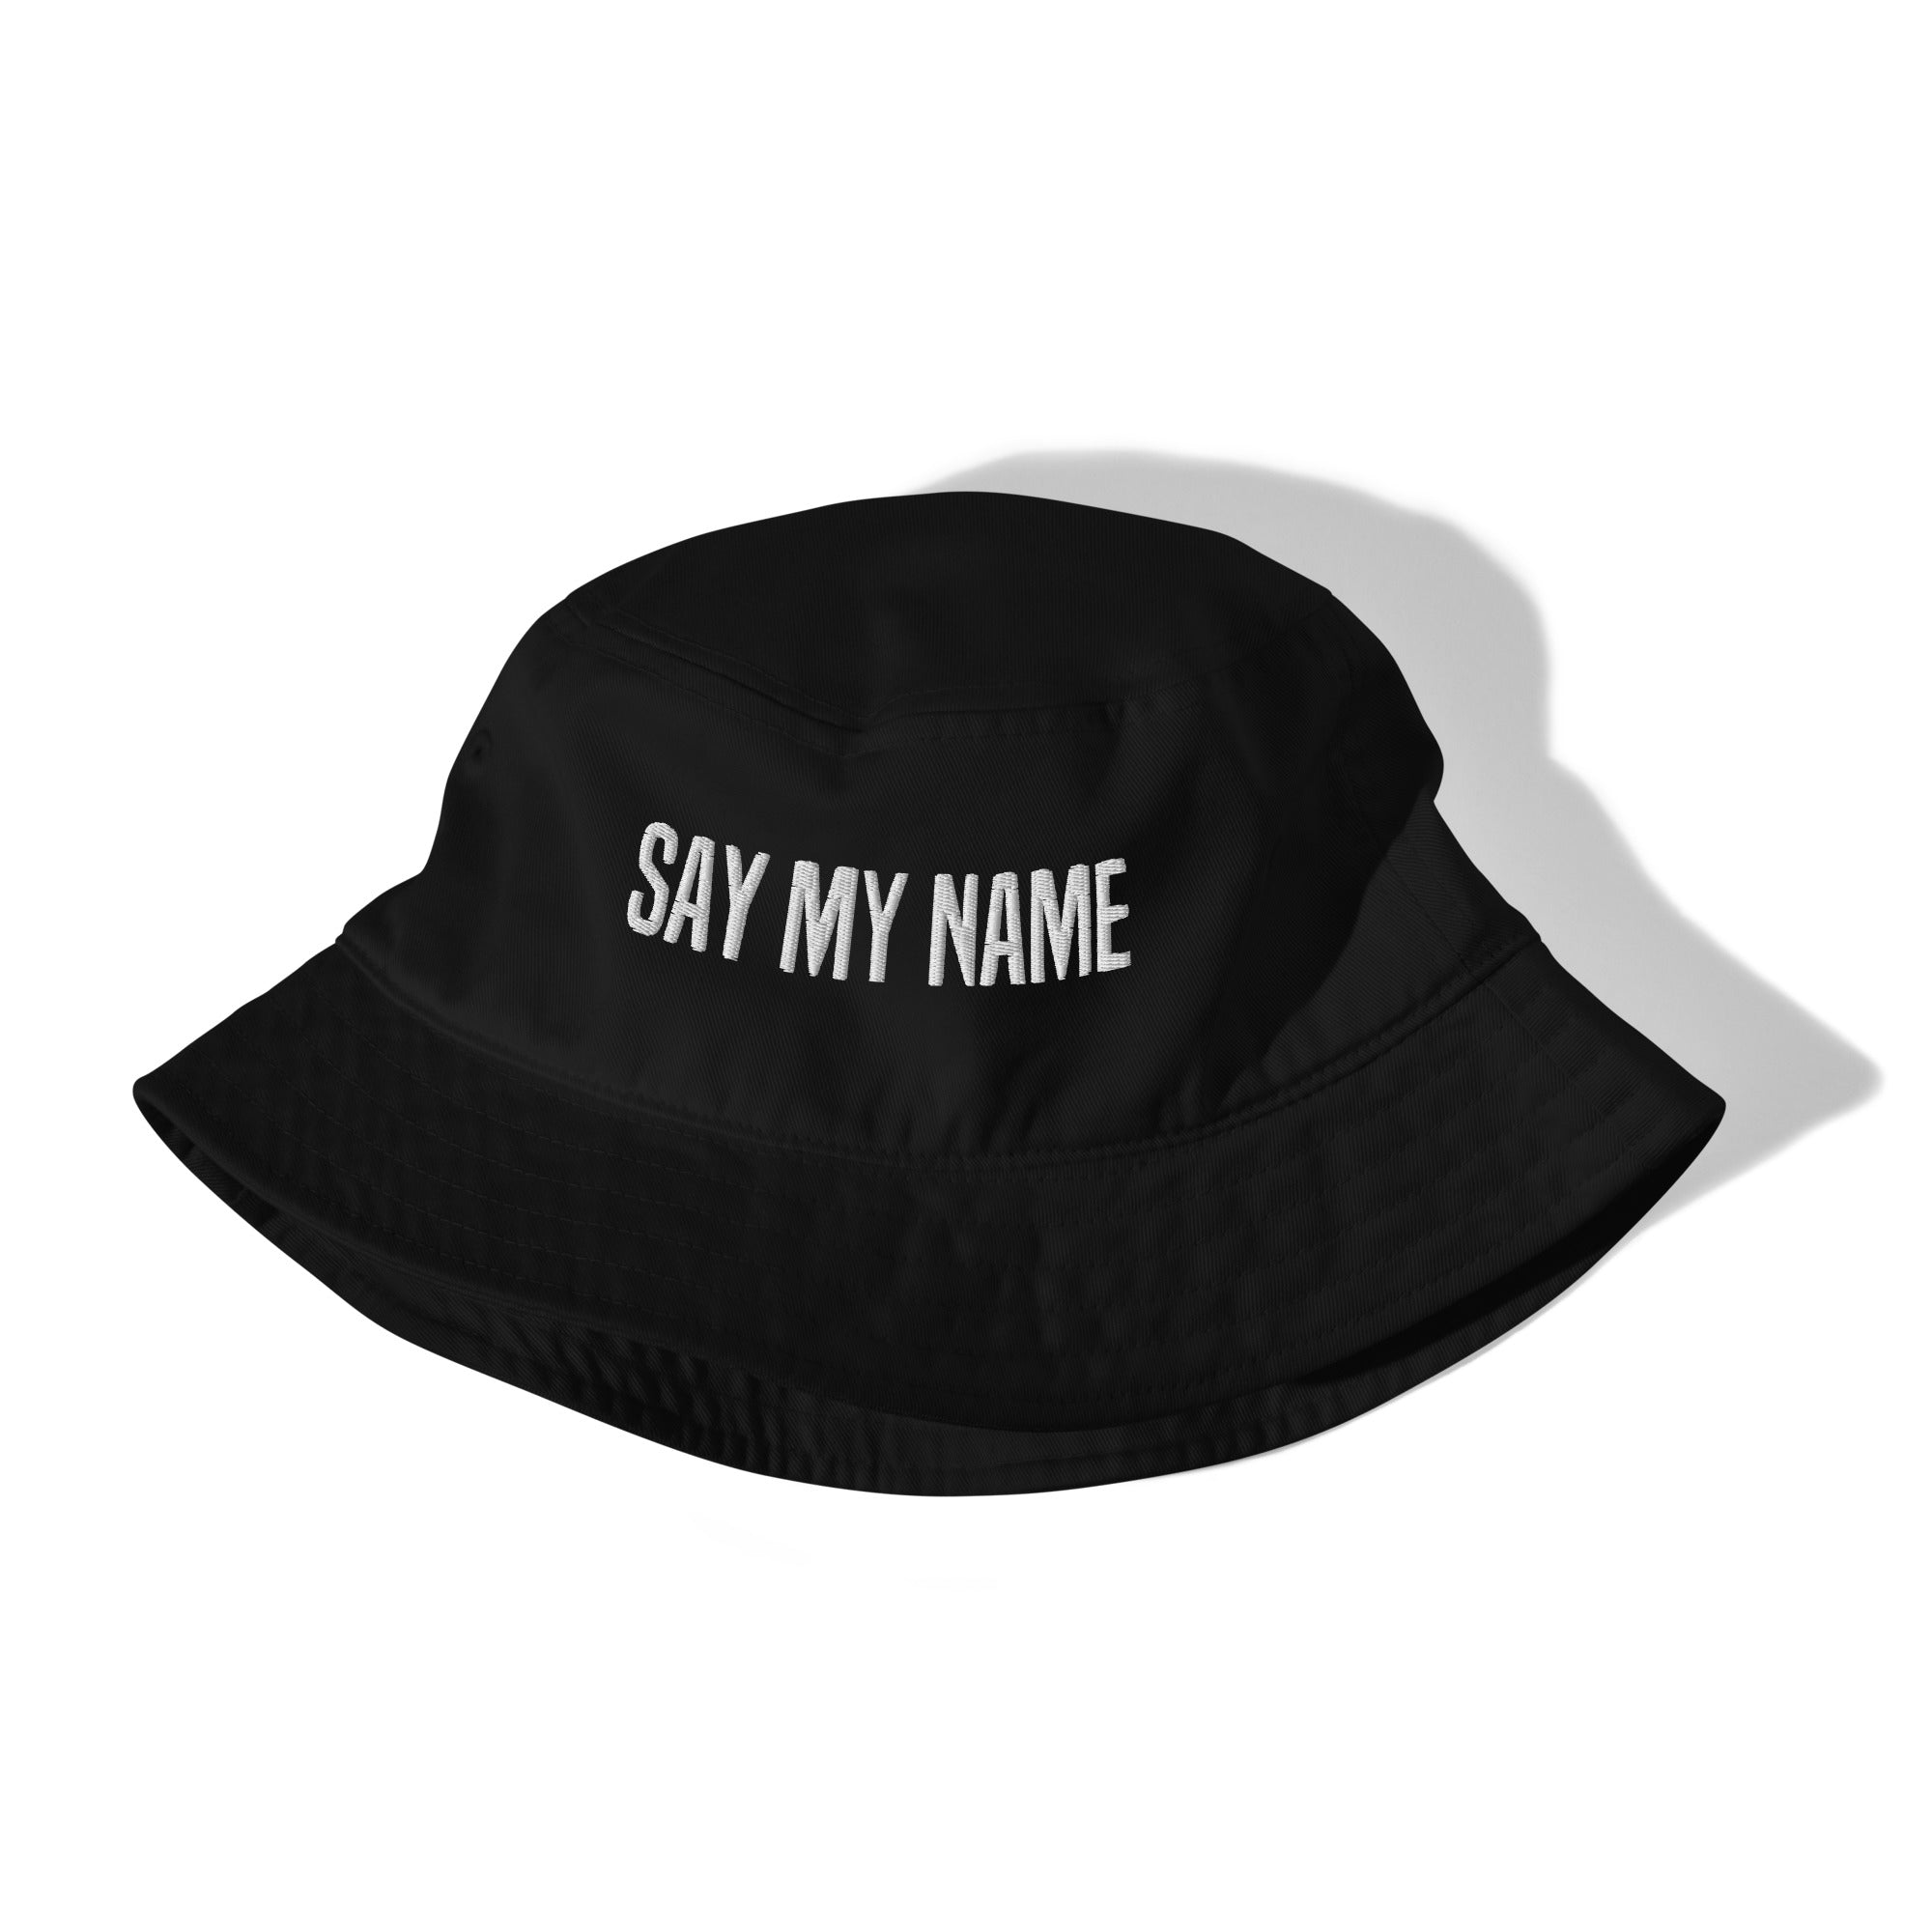 Eco-friendly bucket hat SAY MY NAME